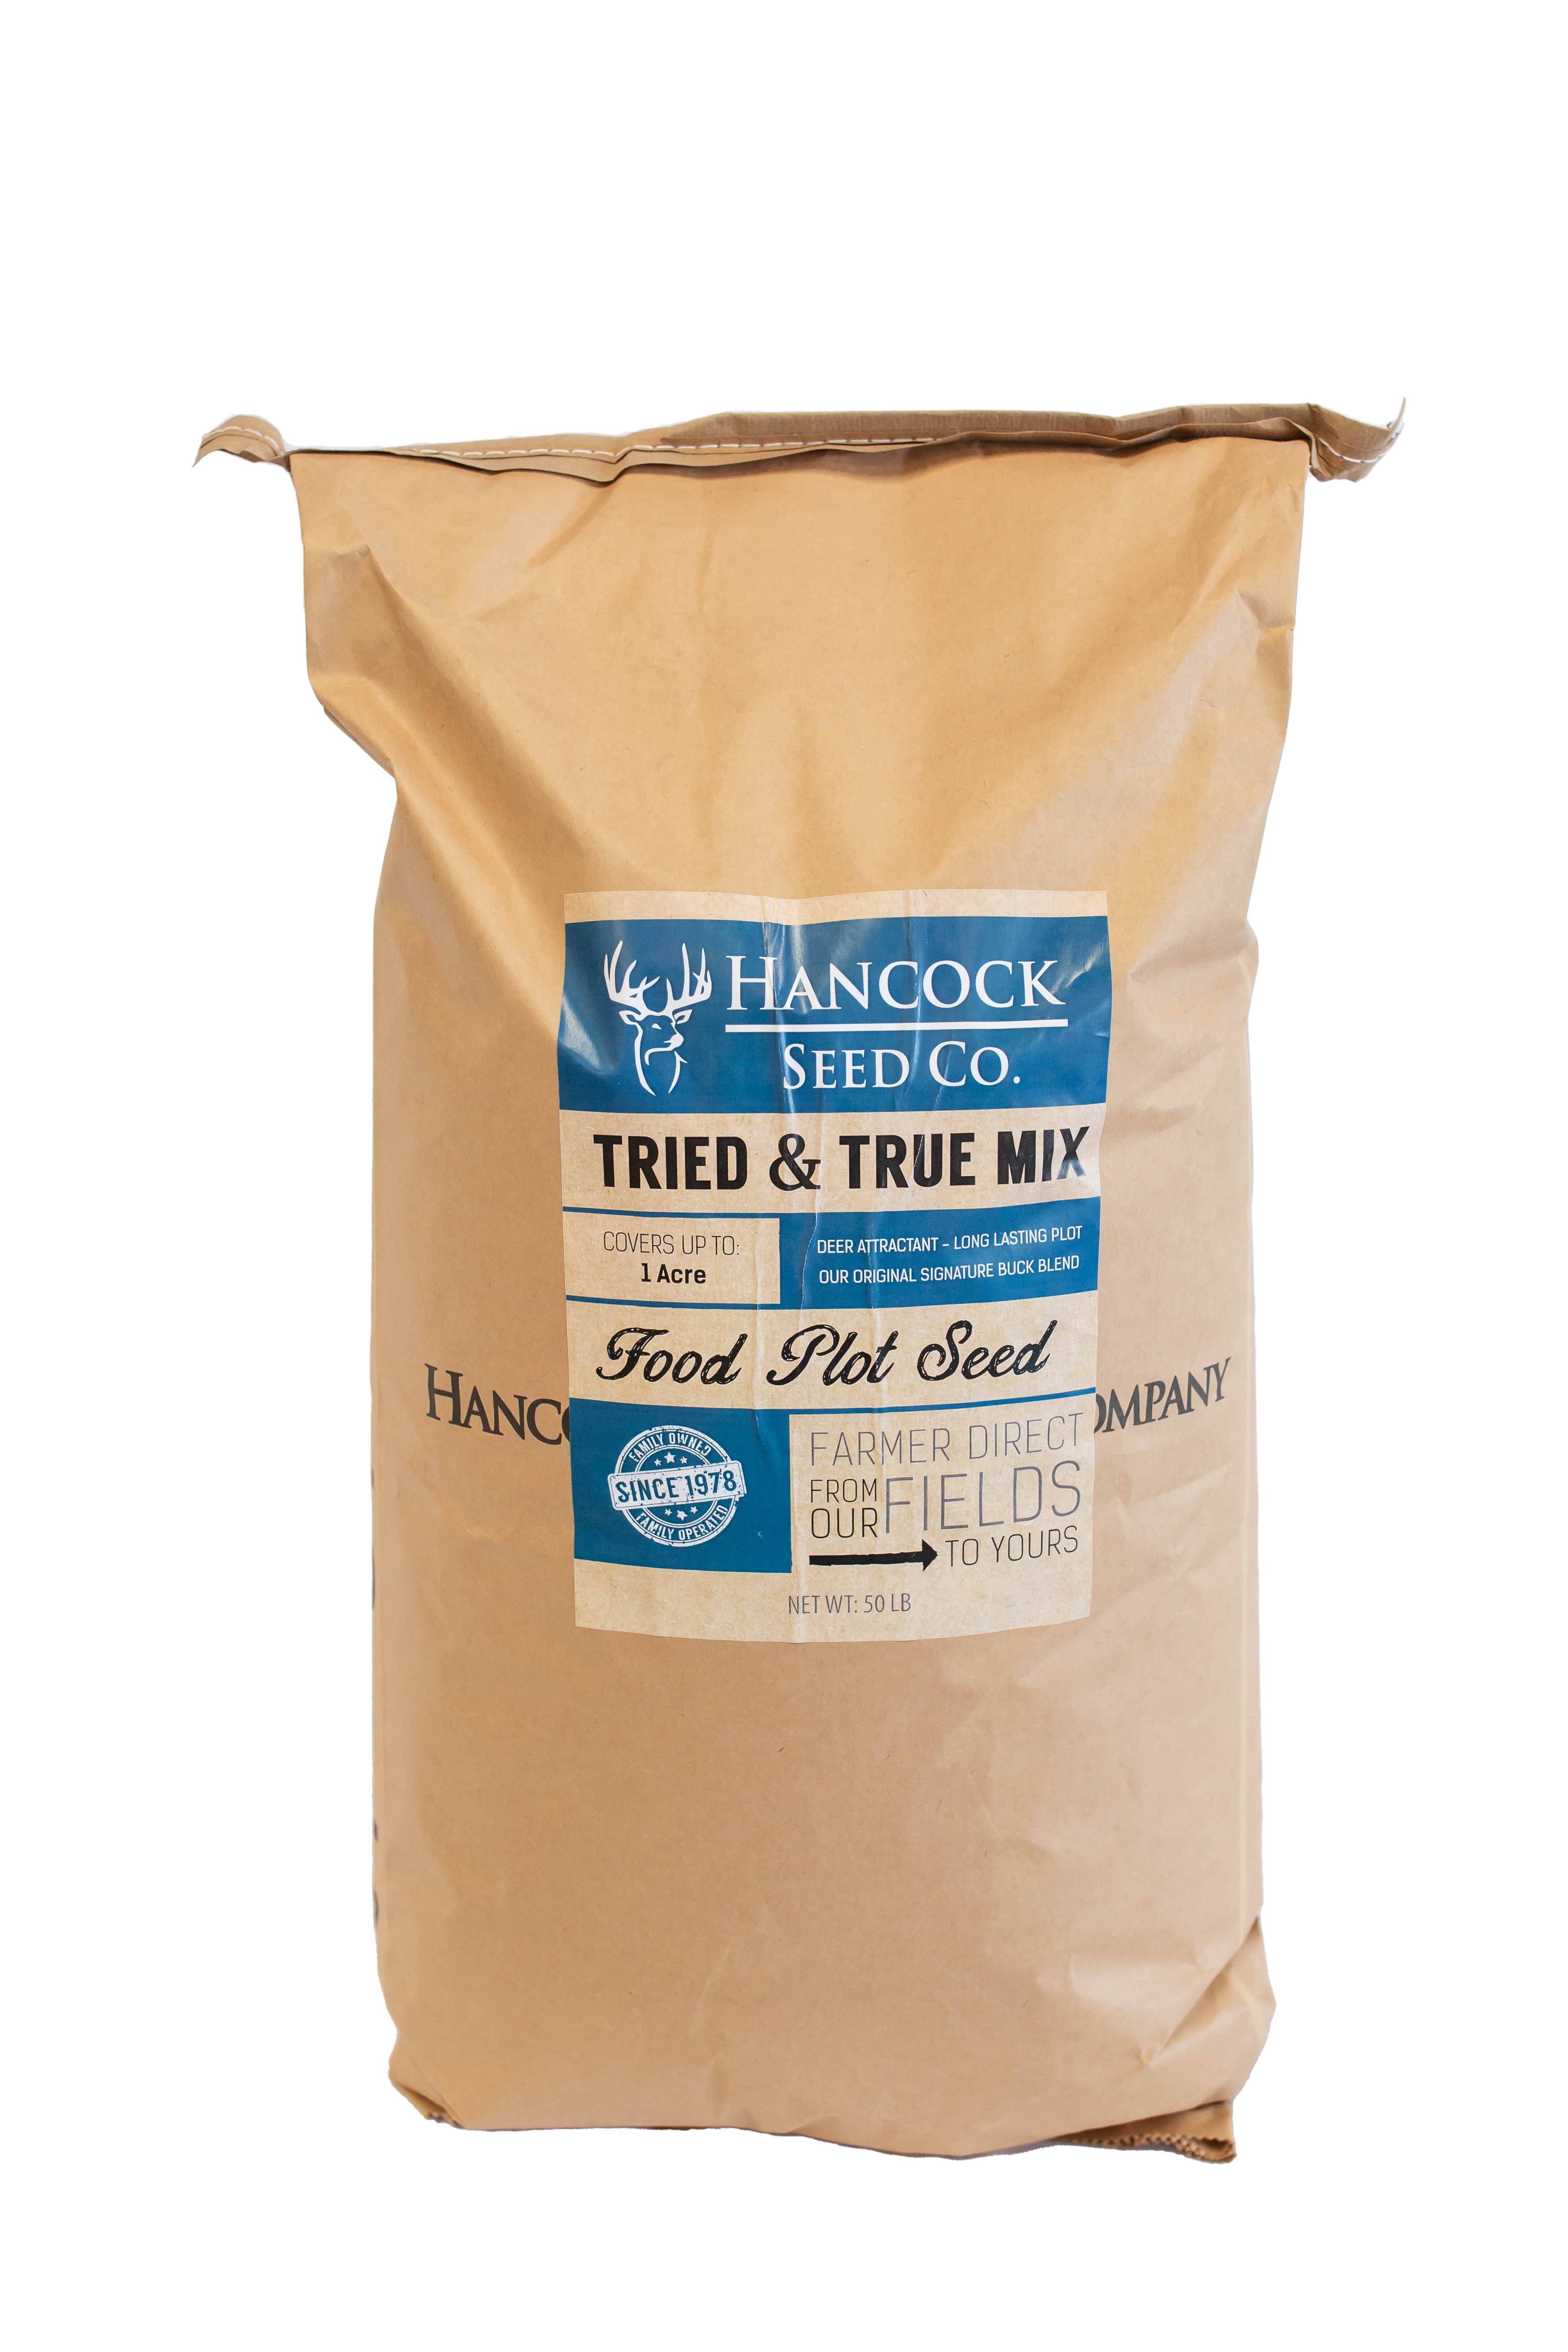 Hancock's Tried and True Spring & Summer Mix, 50 lb. Bag